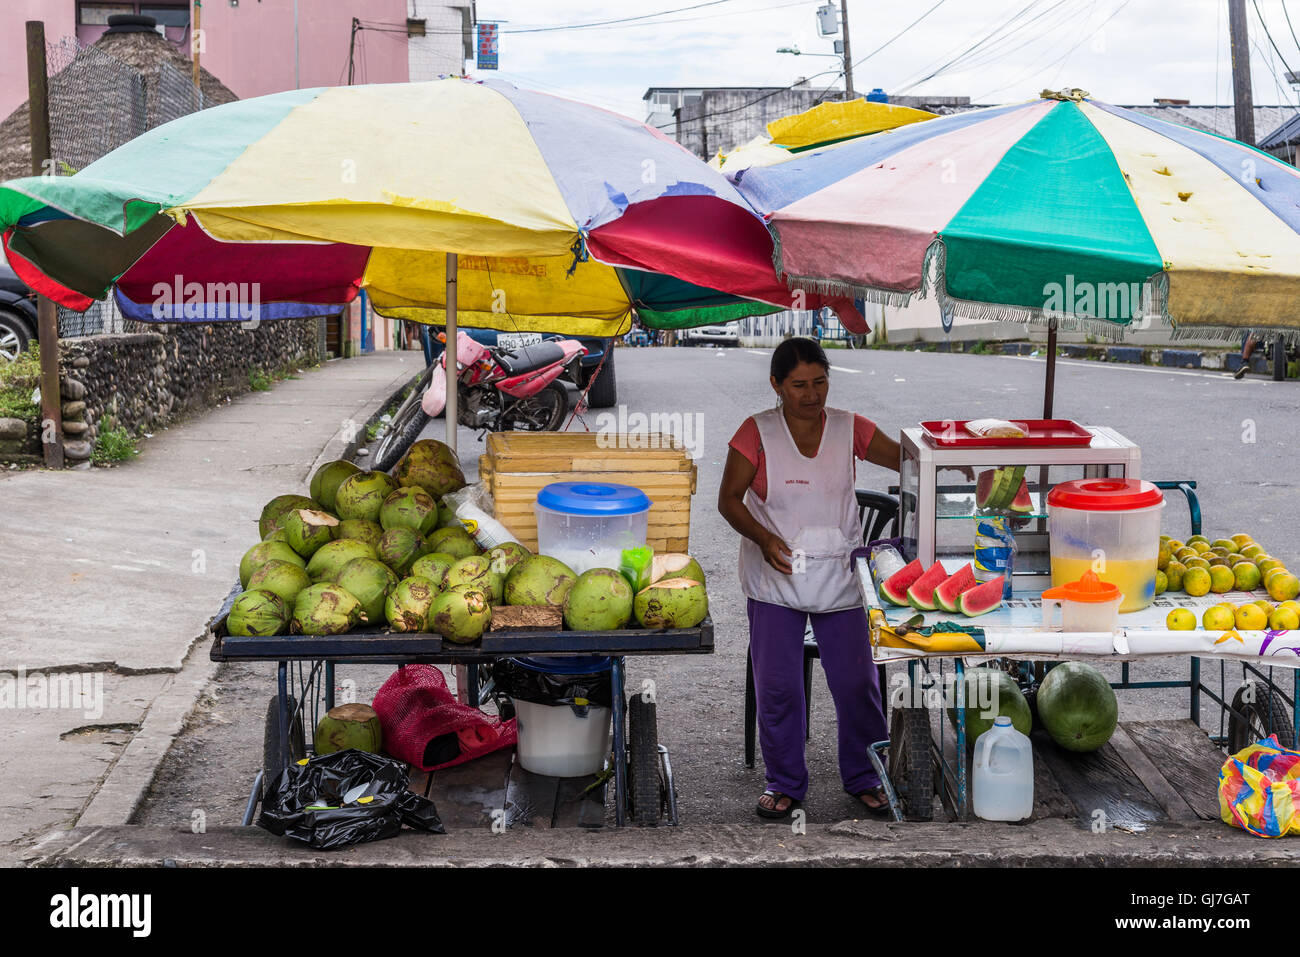 A fresh fruit and juice stand on the street of Coca, the gateway city to the Amazons, Ecuador, South America. Stock Photo